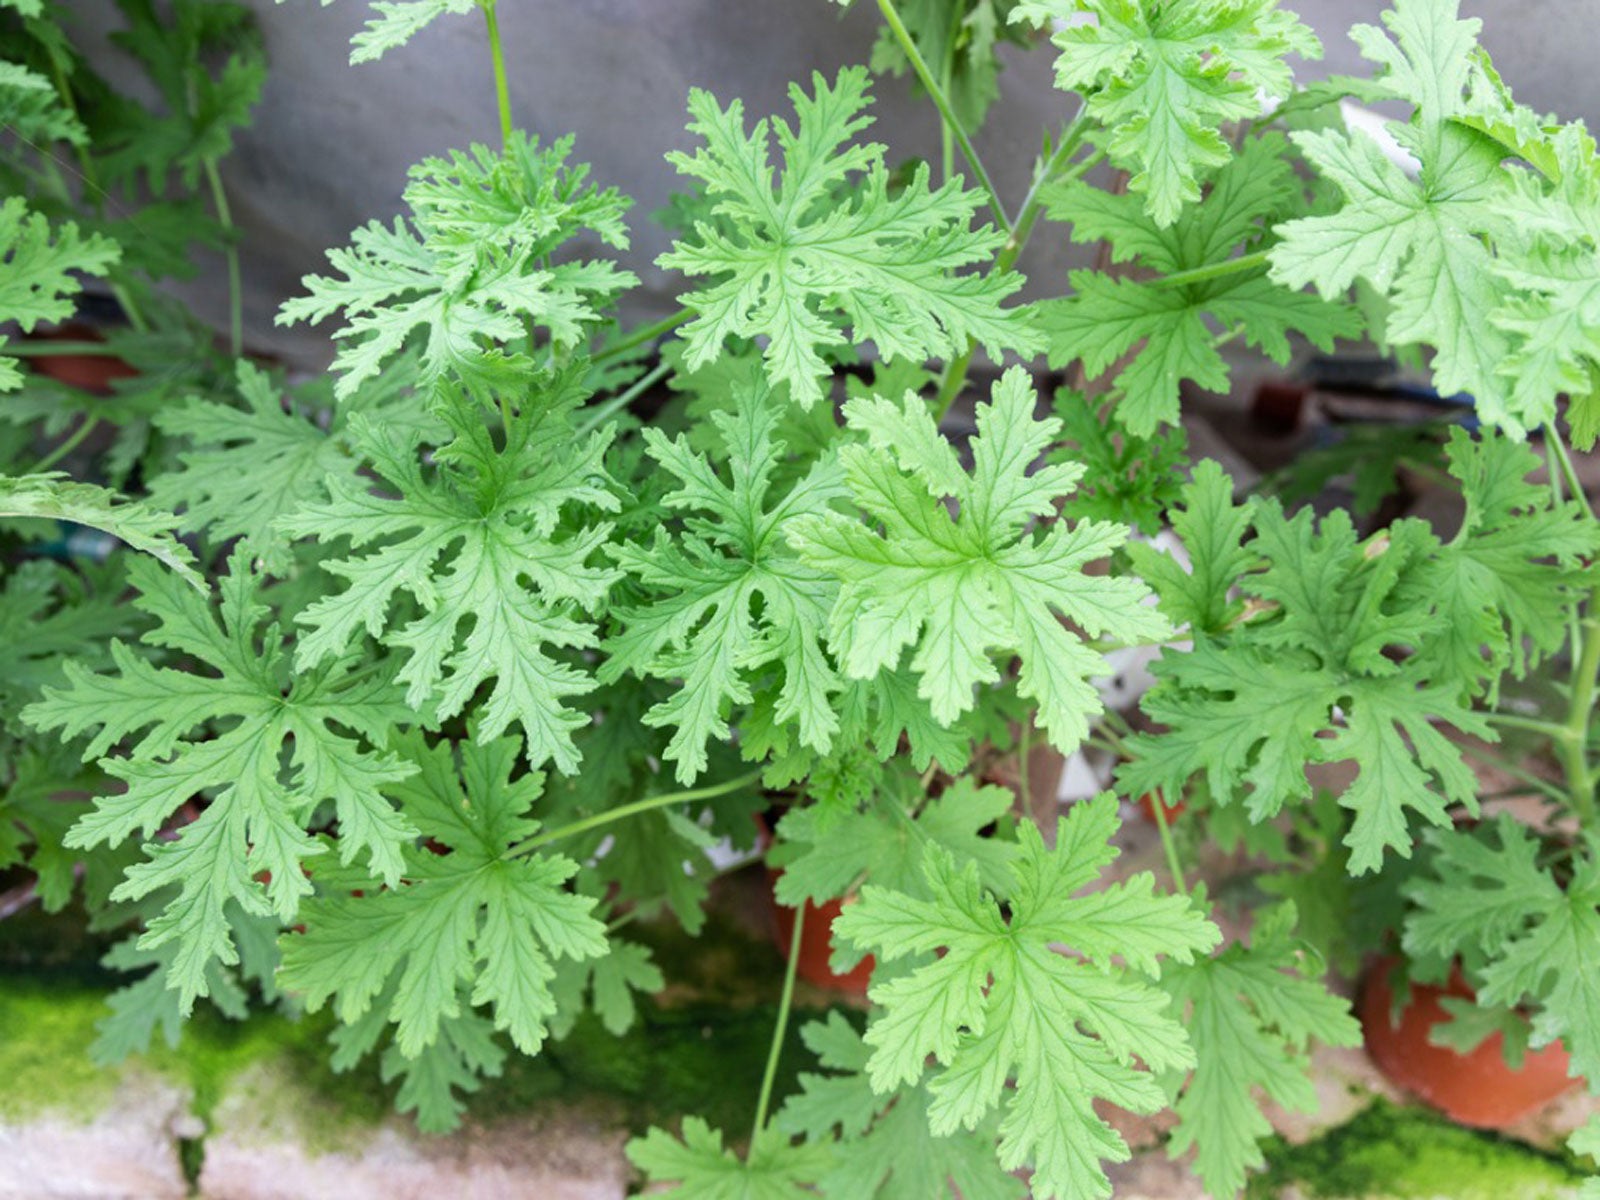 Is Citronella Safe For Pets Citronella Geranium Poisoning In Dogs And Cats